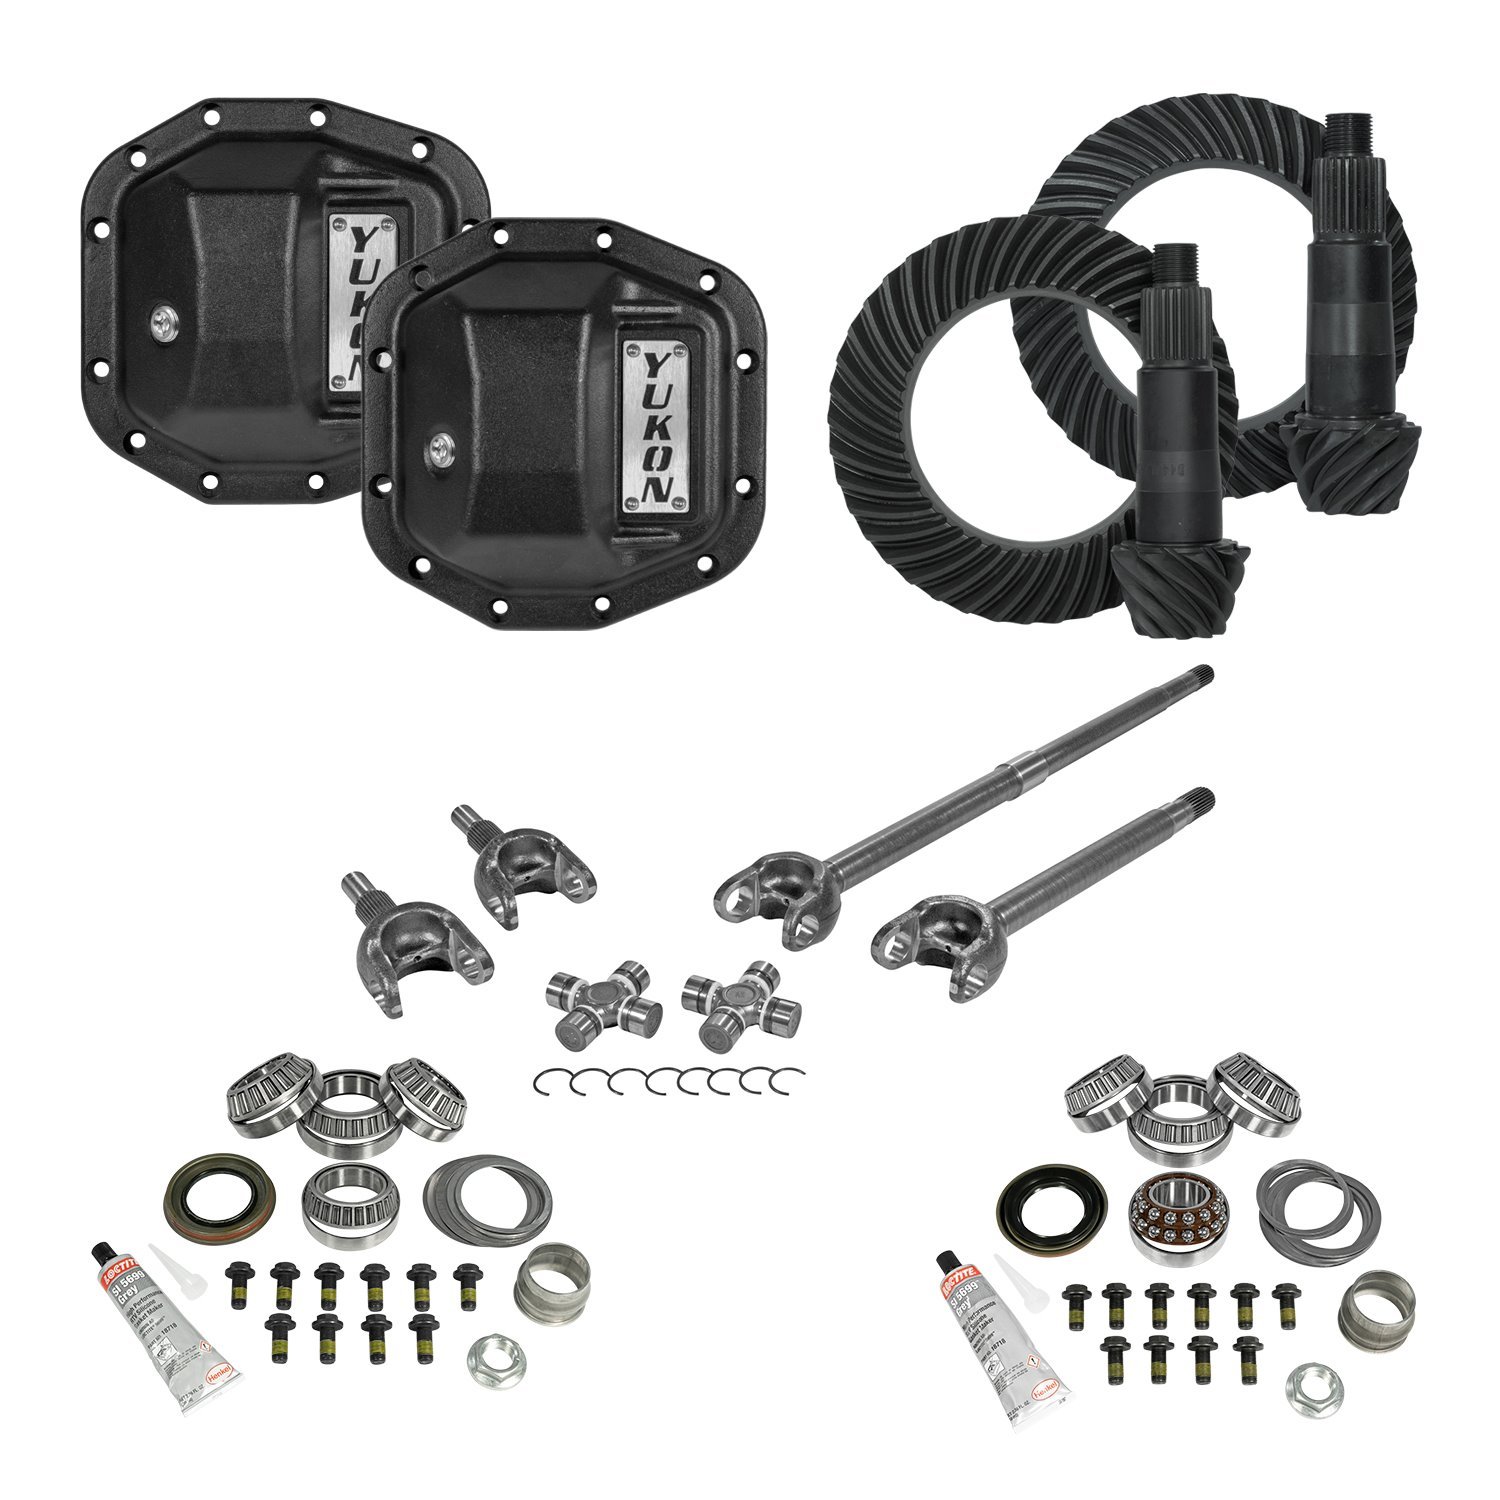 Stage 3 Jeep Jl Re-Gear Kit W/Covers, Front Axles, Dana 30/35, 3.73 Ratio